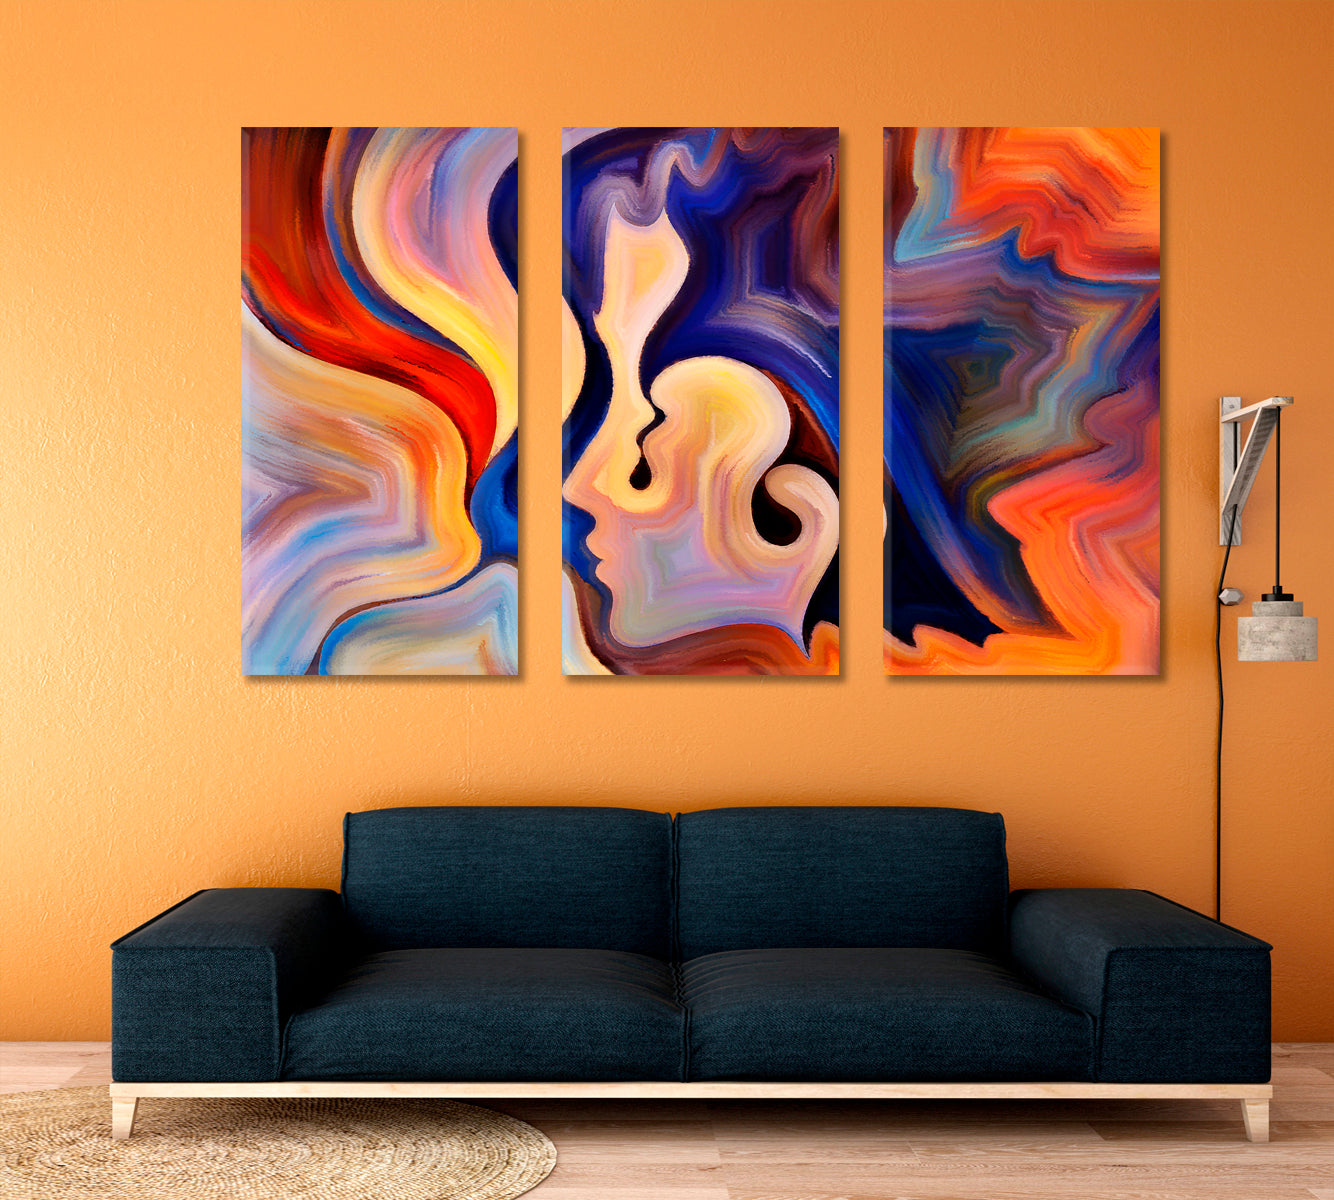 Human and Nature Abstract Colorful Design Contemporary Art Artesty 3 panels 36" x 24" 